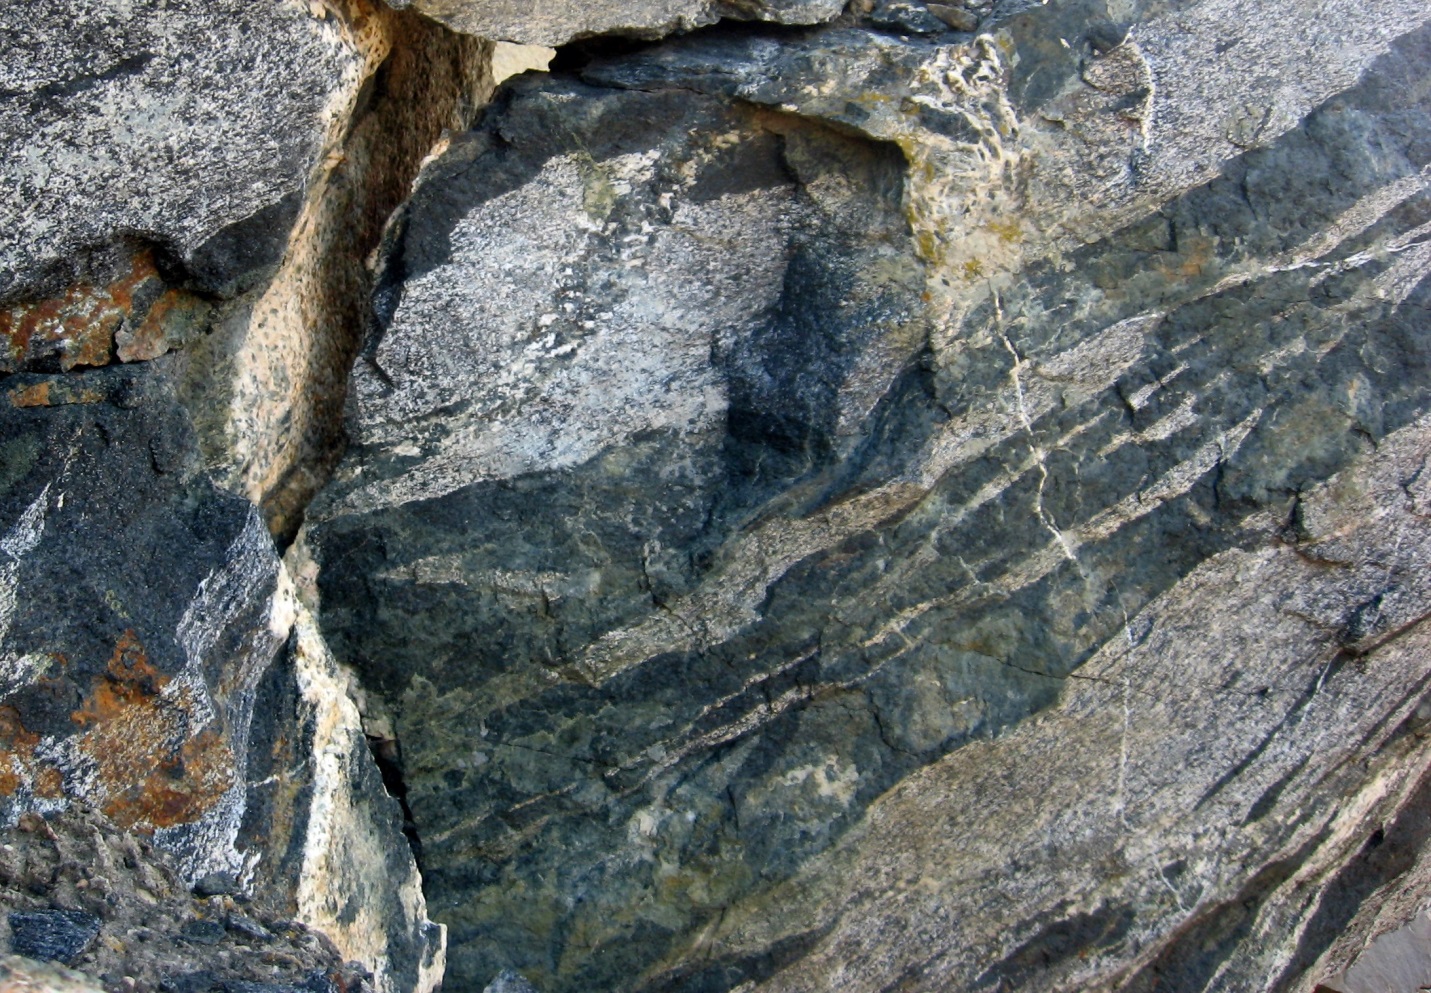 It’s That Easy — Get More Than 17/25 on This Geography Test to Win metamorphic rock